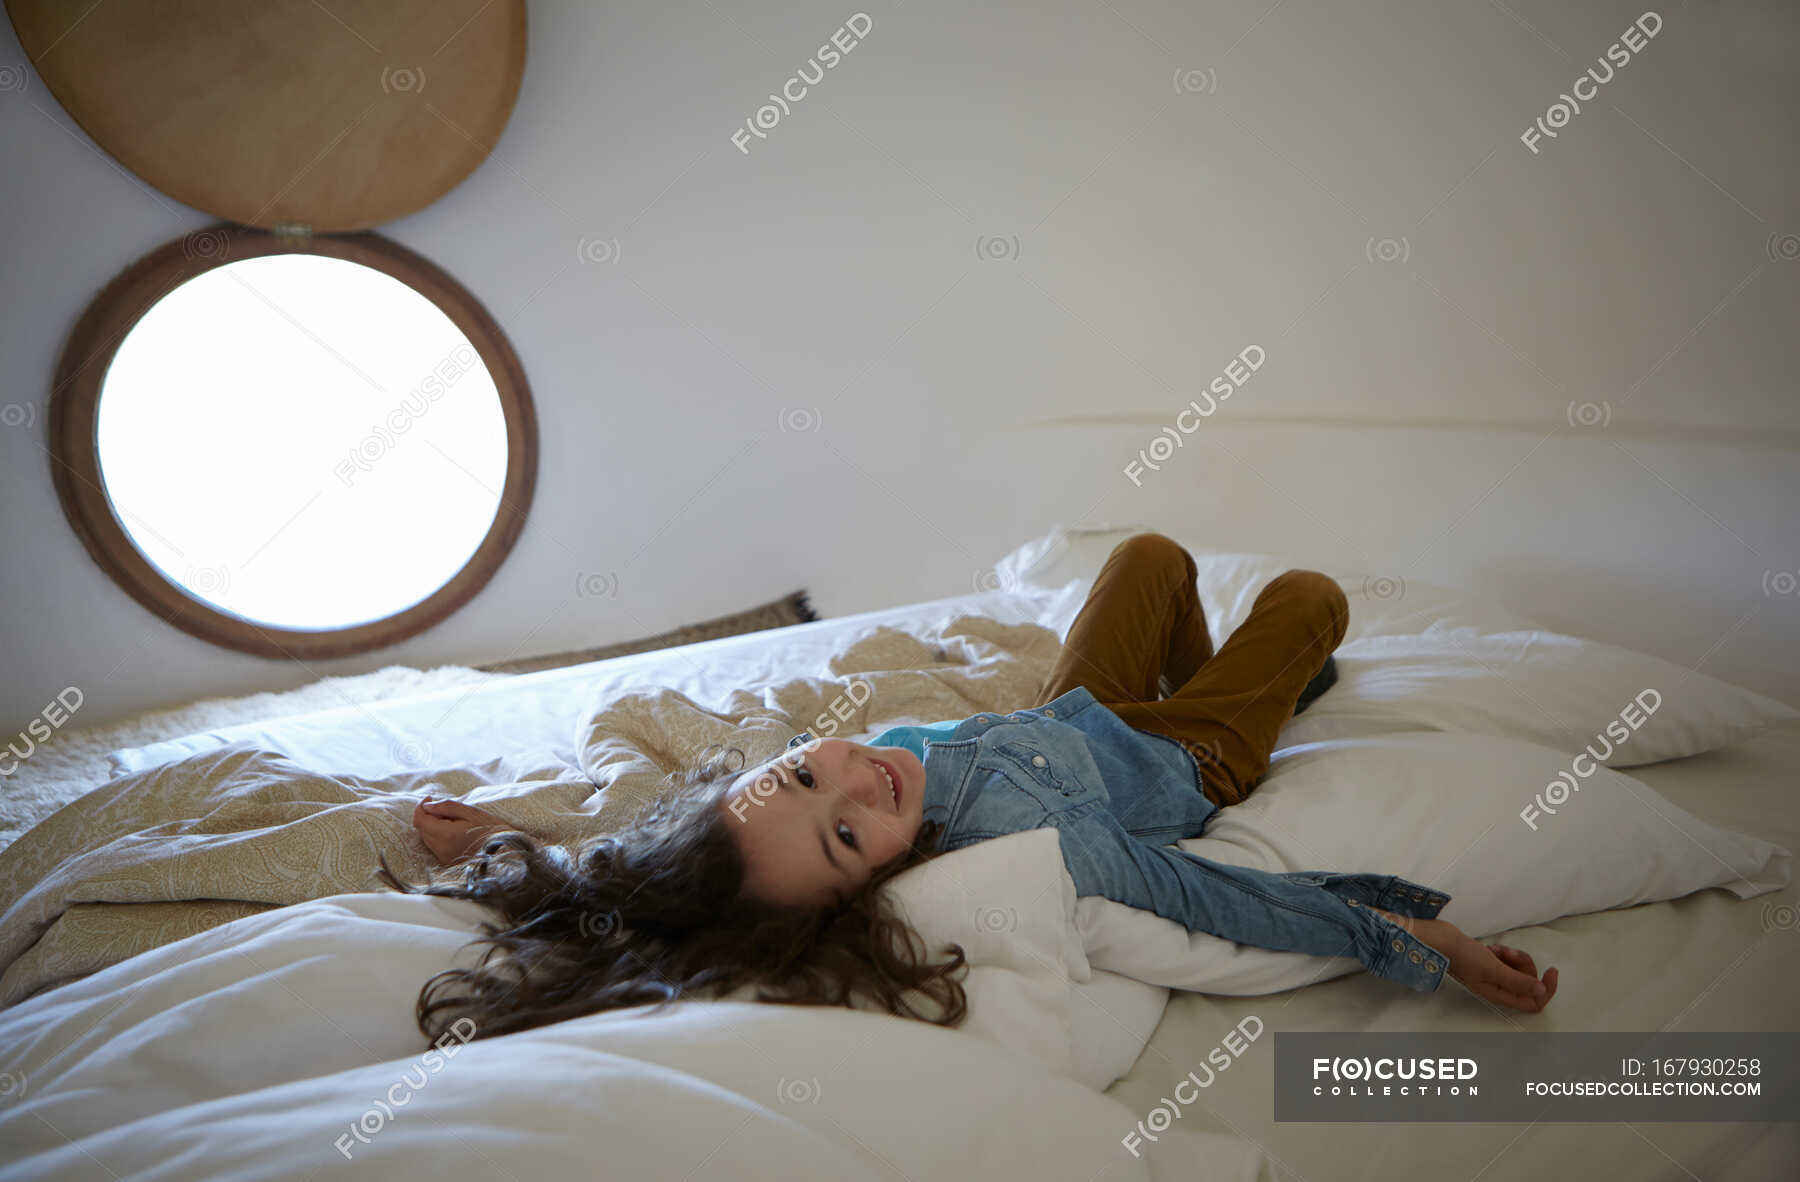 Candid girl in bedroom